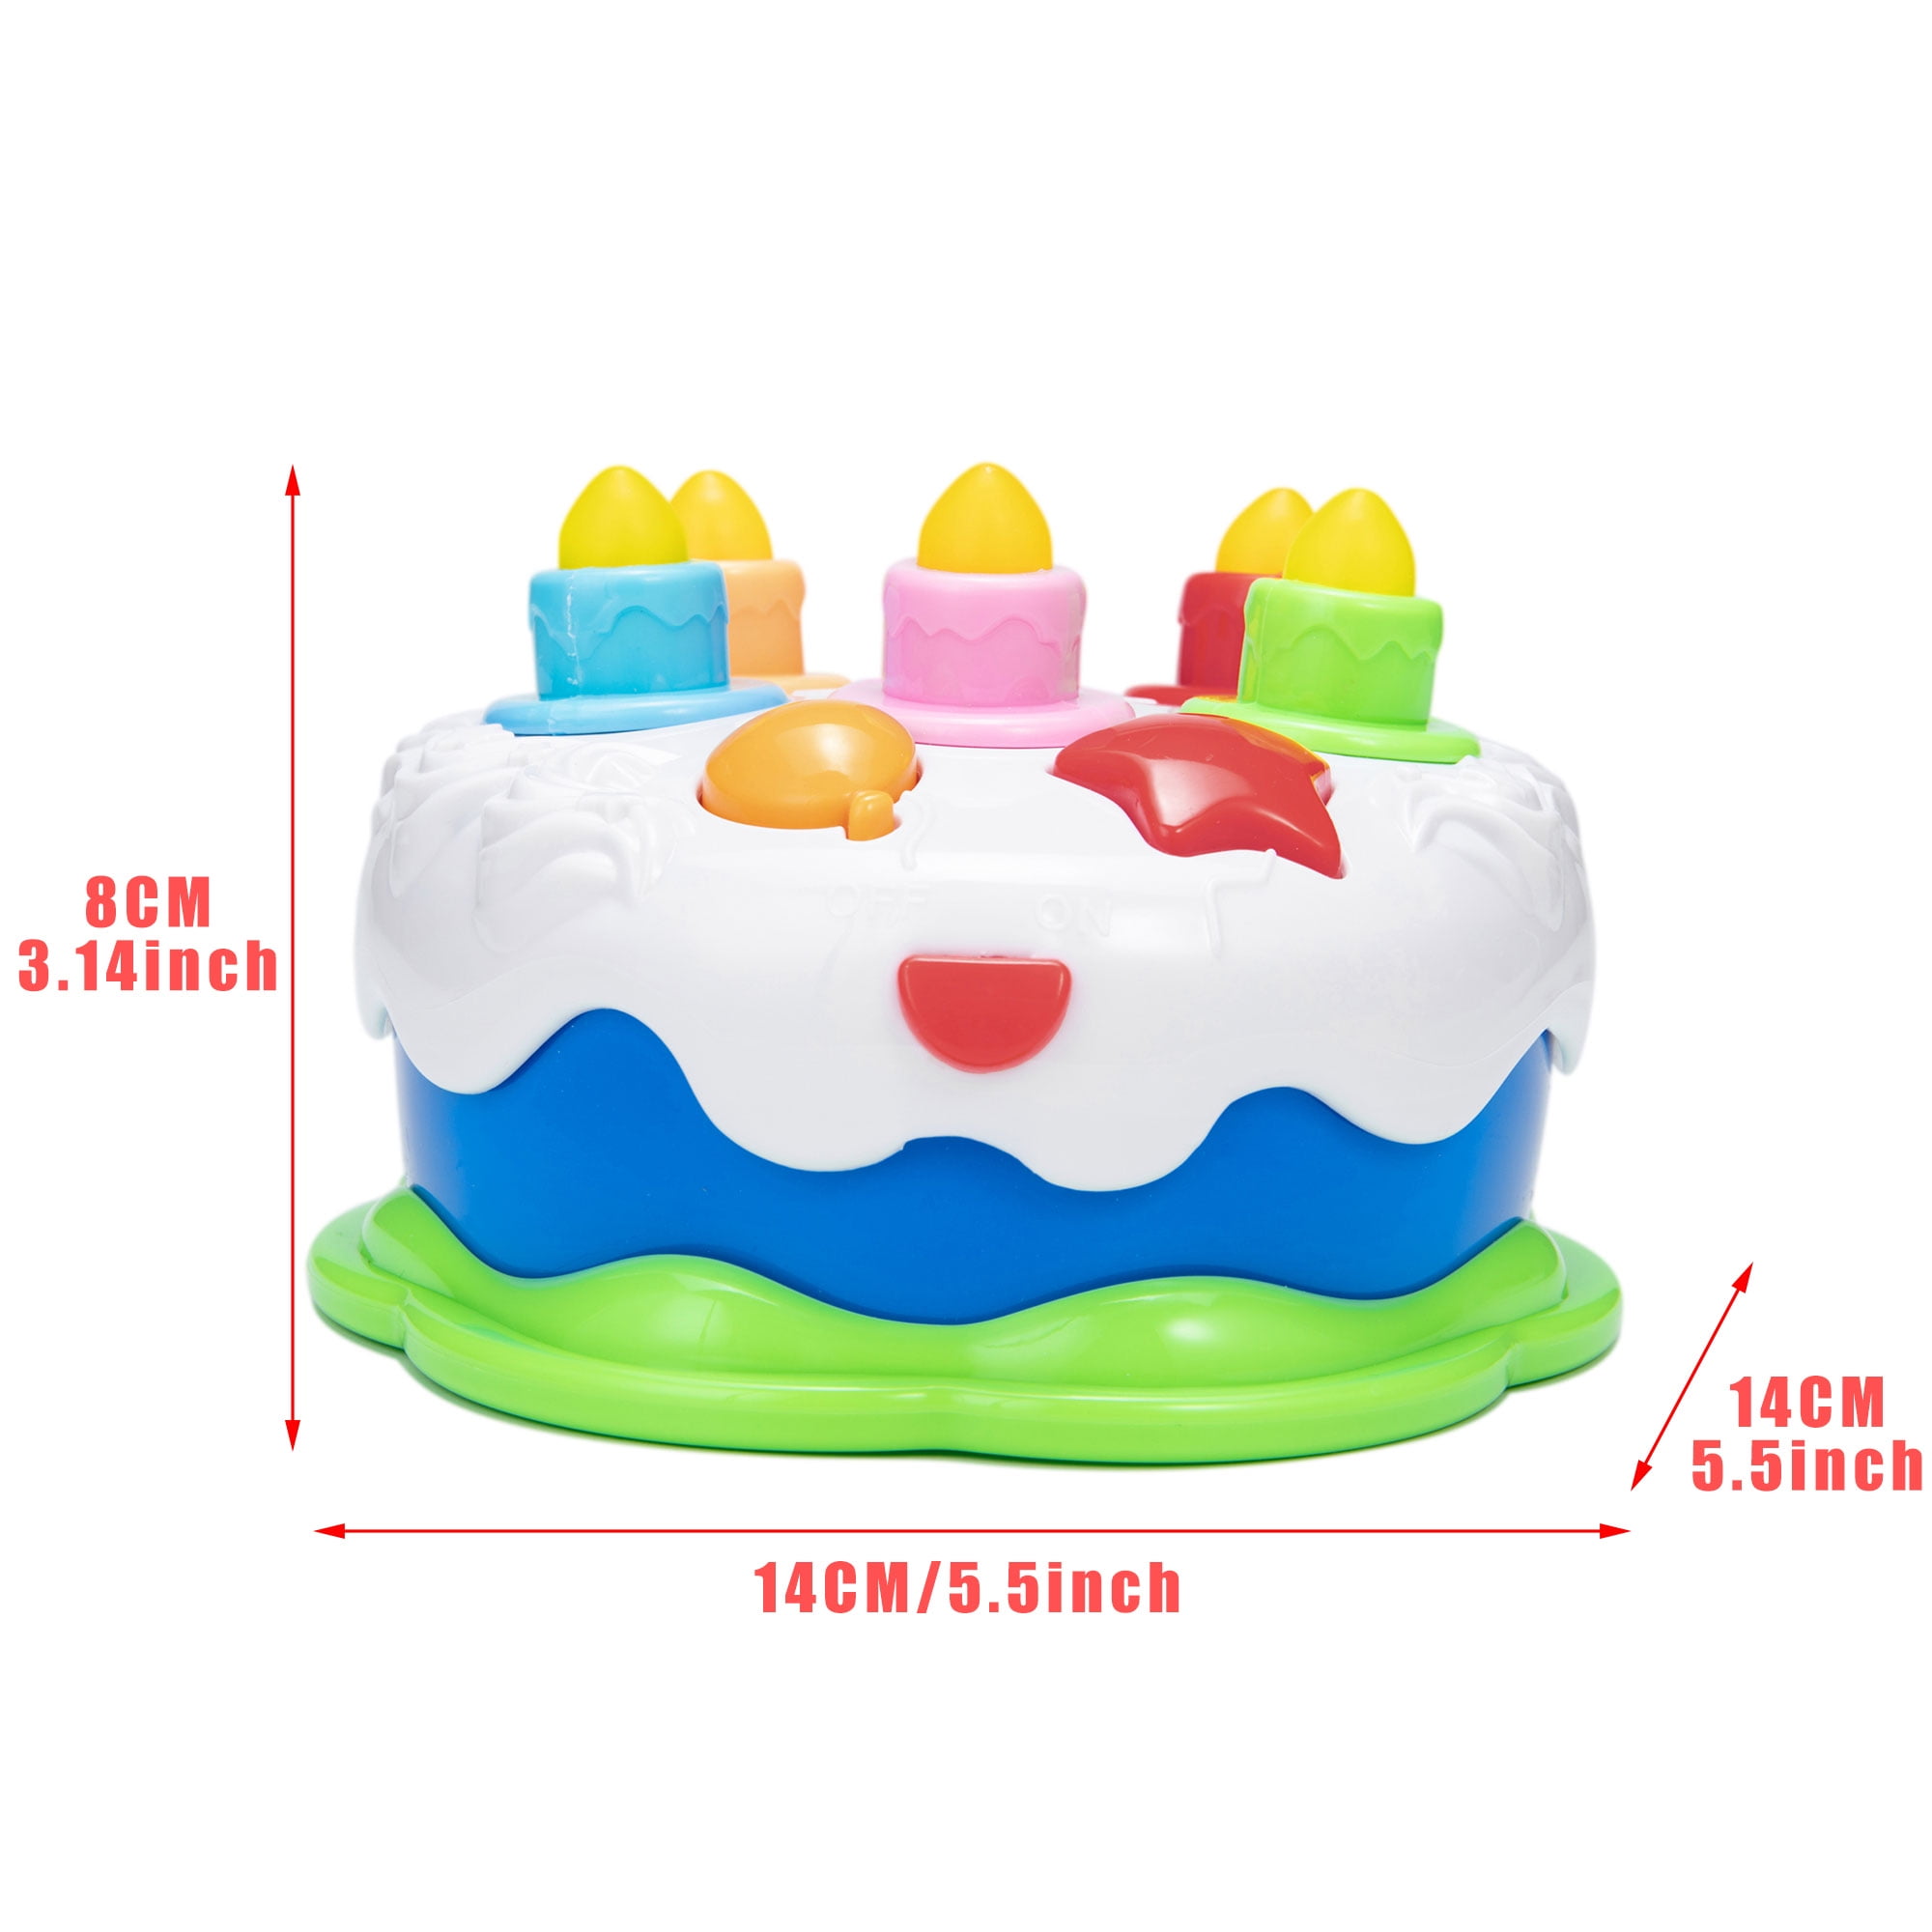 USA Pretend Play Birthday Cake Toy Candles Food Kids Toddler Music Light Up Gift 